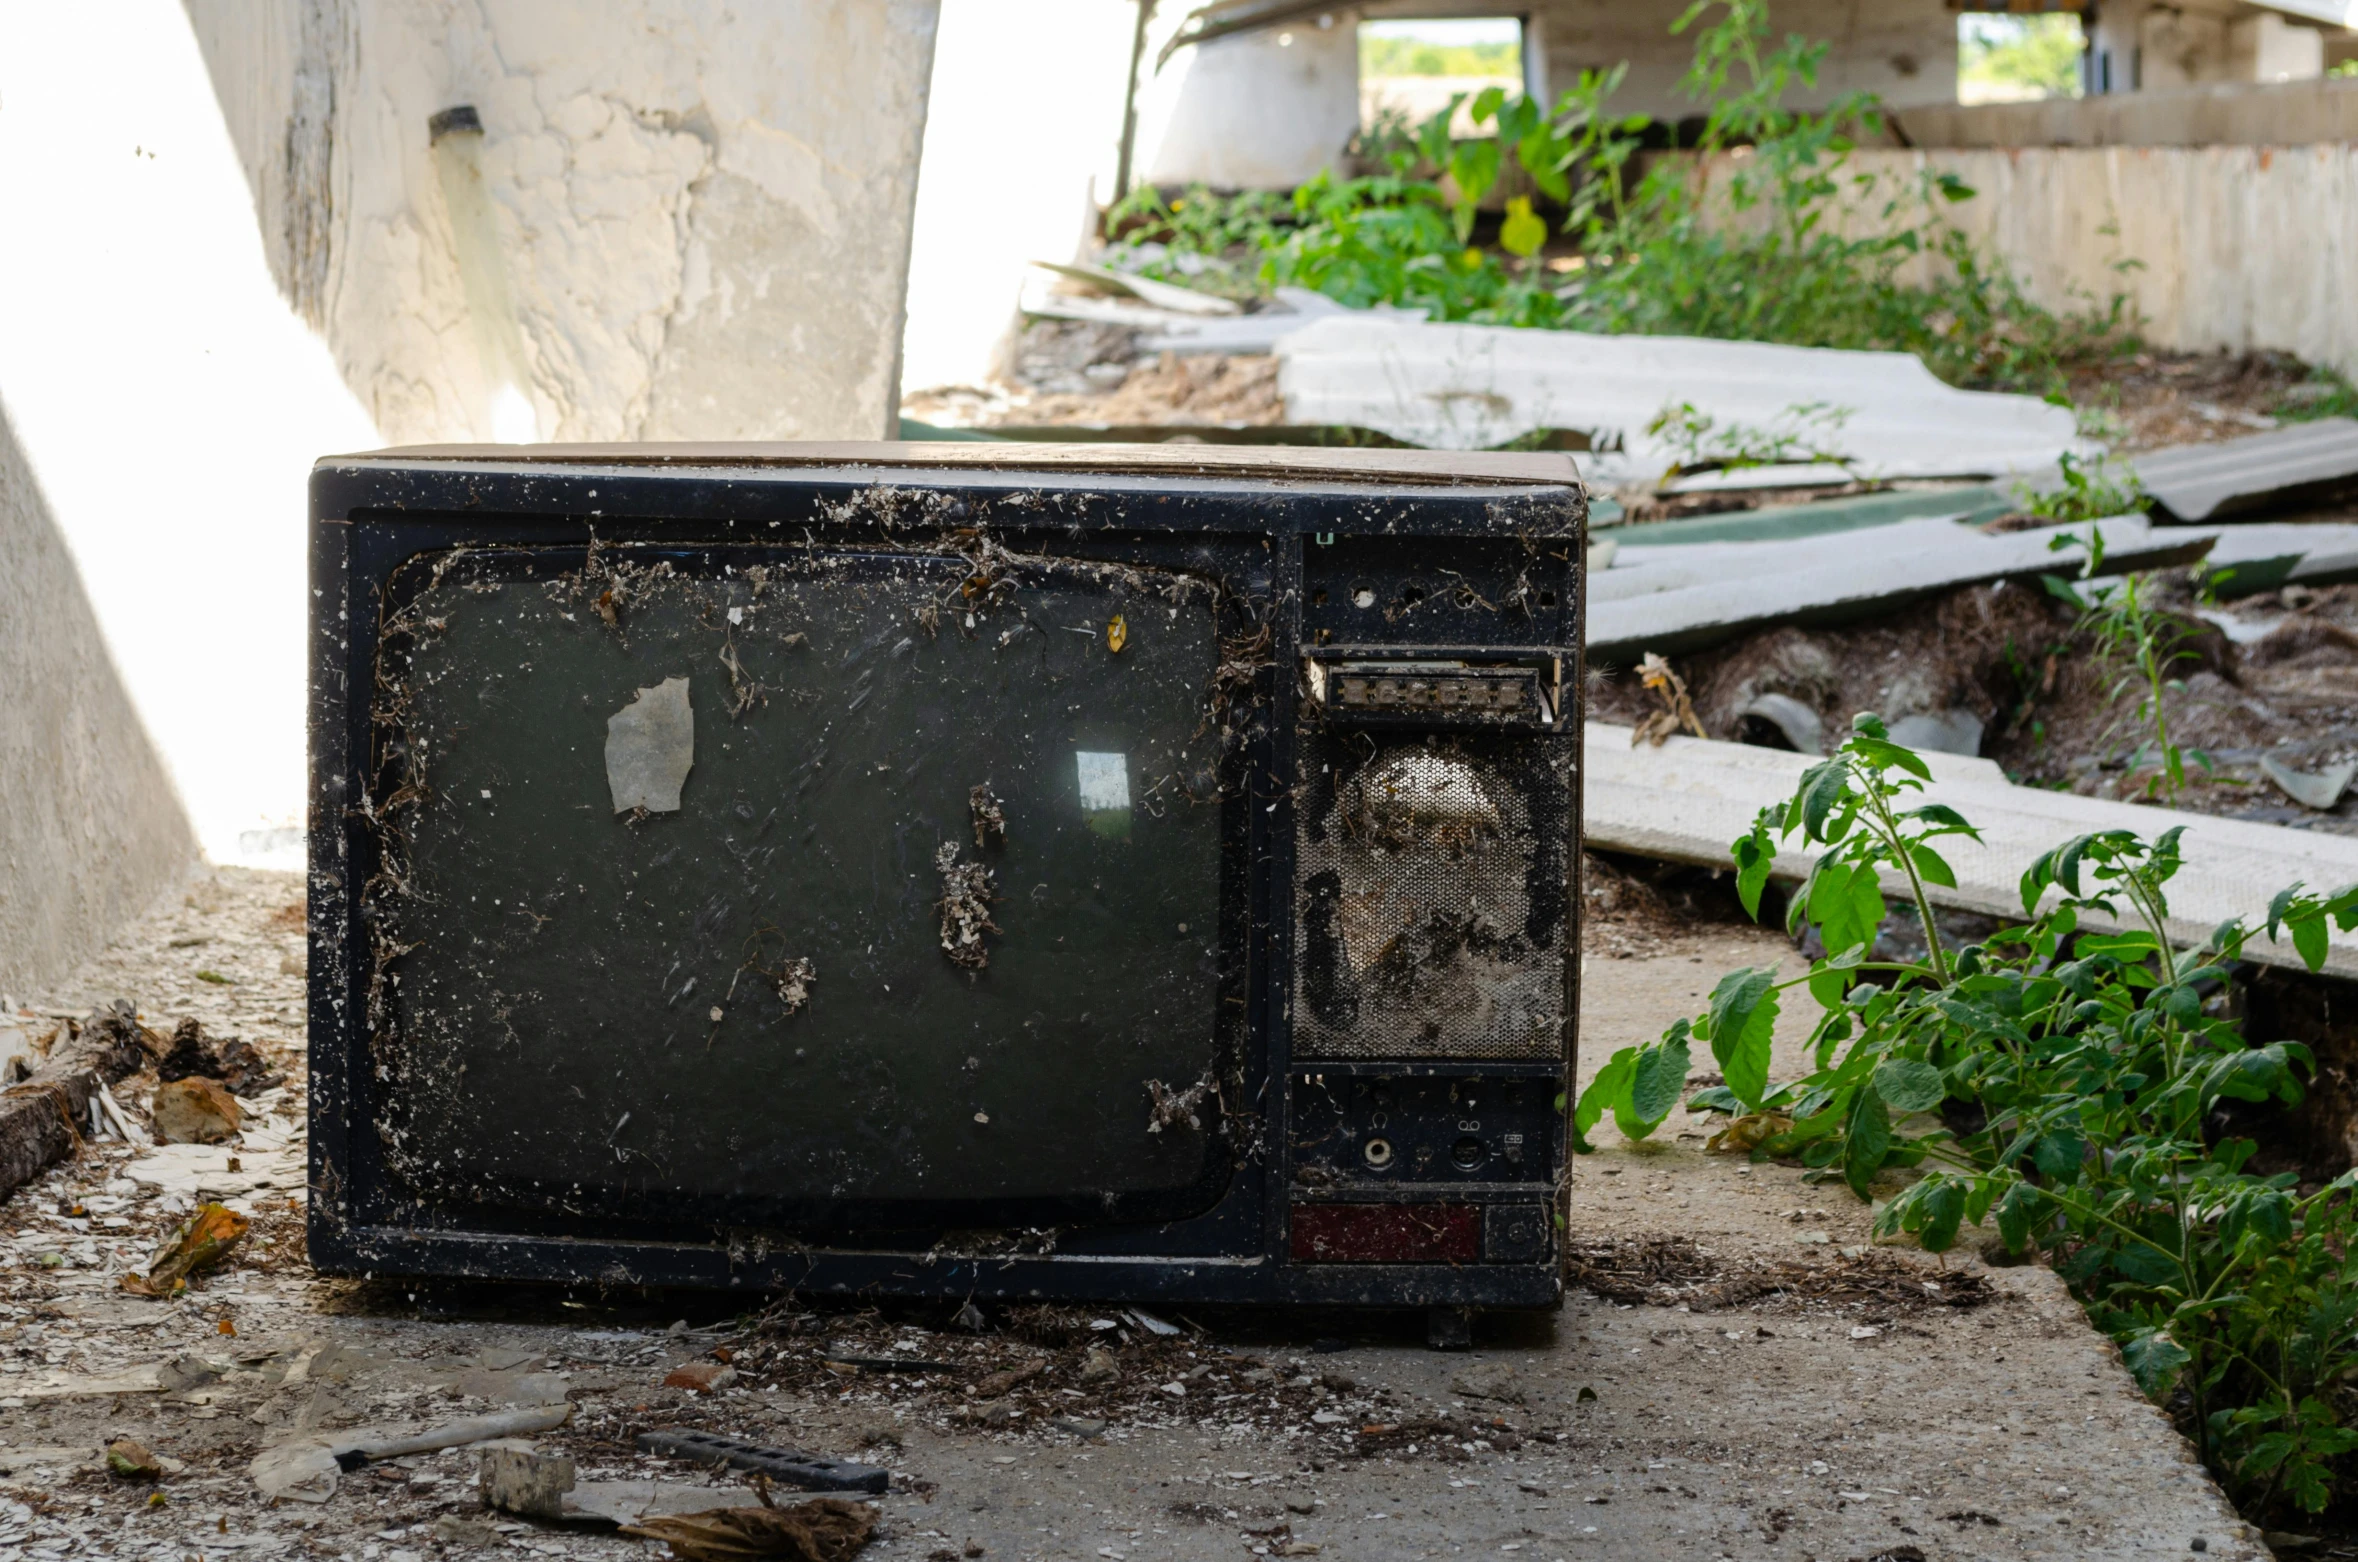 a black microwave sitting on top of a cement floor, unsplash, video art, overgrown spamp, tvs, in ruins, promo image